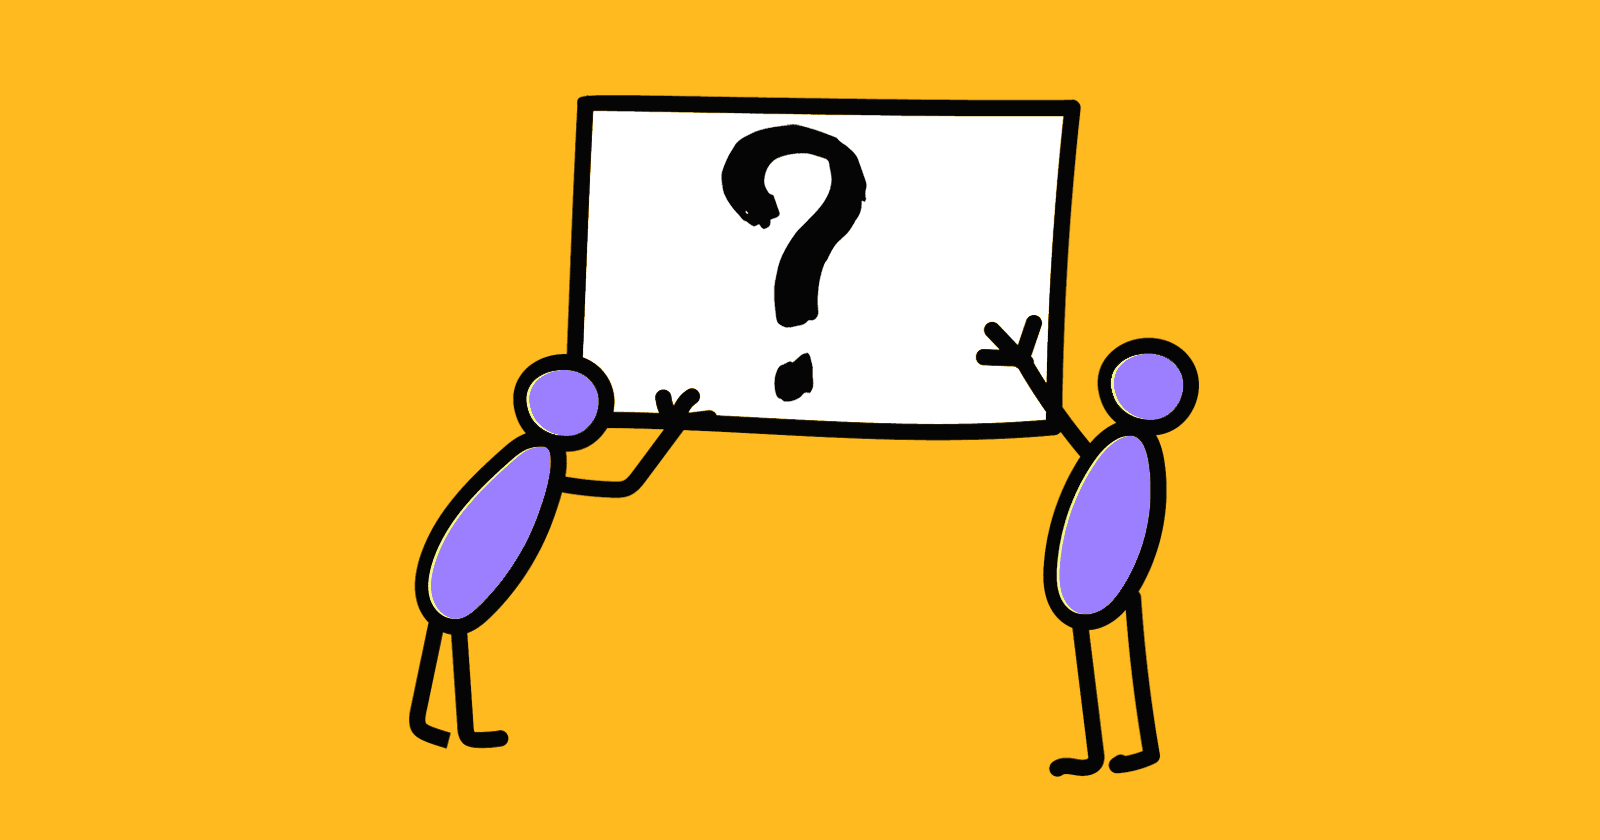 Image of two stick figures holding a large white rectangle with a question mark. Represents Googlebot not understanding a web page.